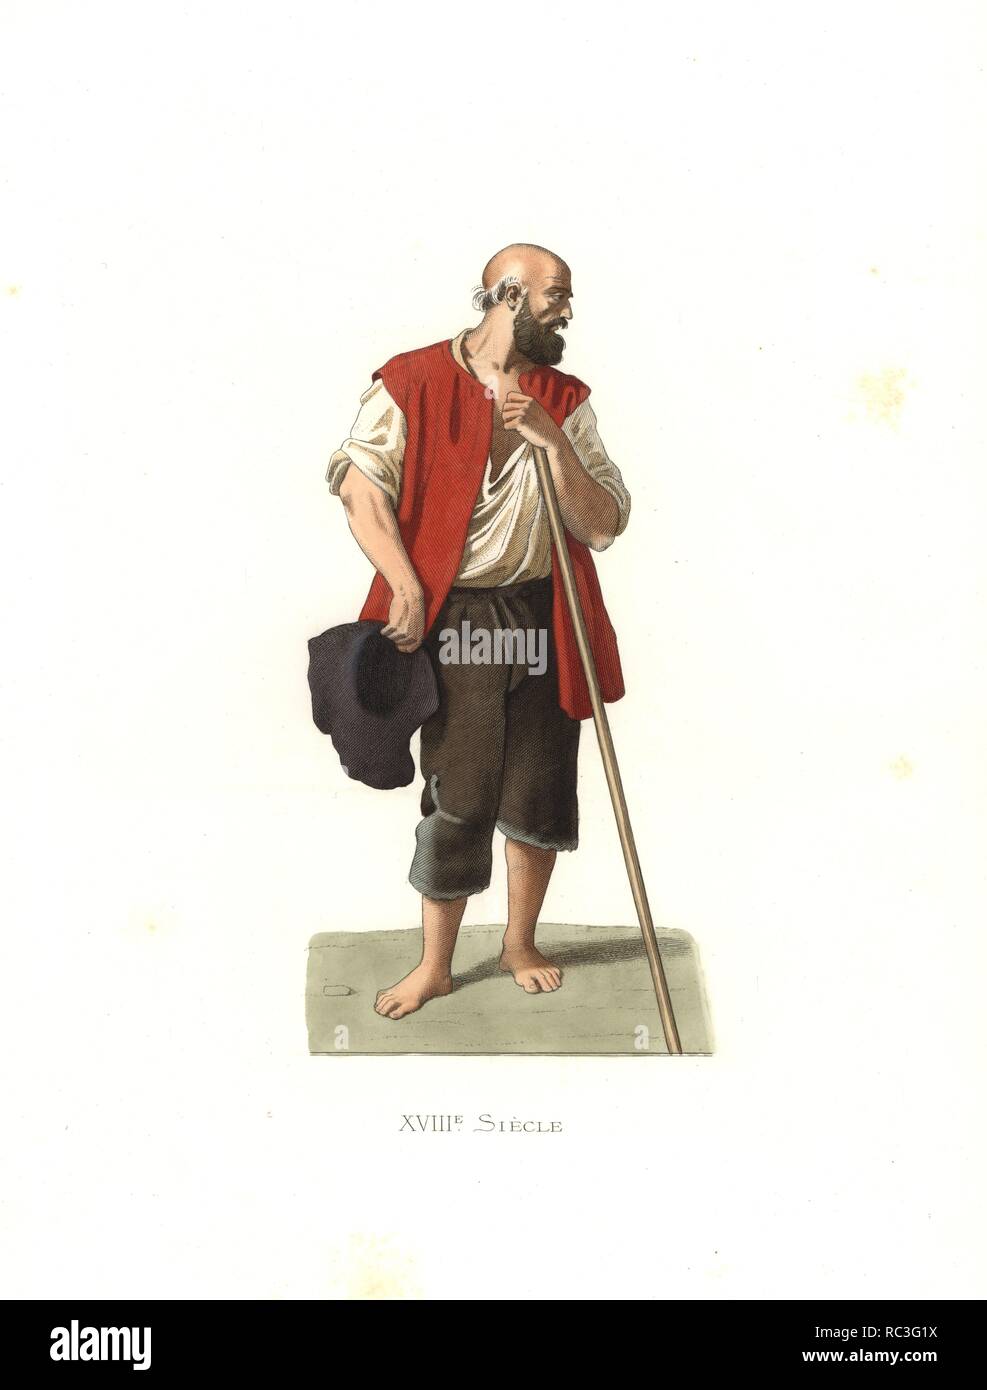 Peasant of Lombardi, Italy, 18th century, from a painting by Francois Londonio. Handcolored illustration by E. Lechevallier-Chevignard, lithographed by A. Didier, L. Flameng, F. Laguillermie, from Georges Duplessis's 'Costumes historiques des XVIe, XVIIe et XVIIIe siecles' (Historical costumes of the 16th, 17th and 18th centuries), Paris 1867. The book was a continuation of the series on the costumes of the 12th to 15th centuries published by Camille Bonnard and Paul Mercuri from 1830. Georges Duplessis (1834-1899) was curator of the Prints department at the Bibliotheque nationale. Edmond Lech Stock Photo